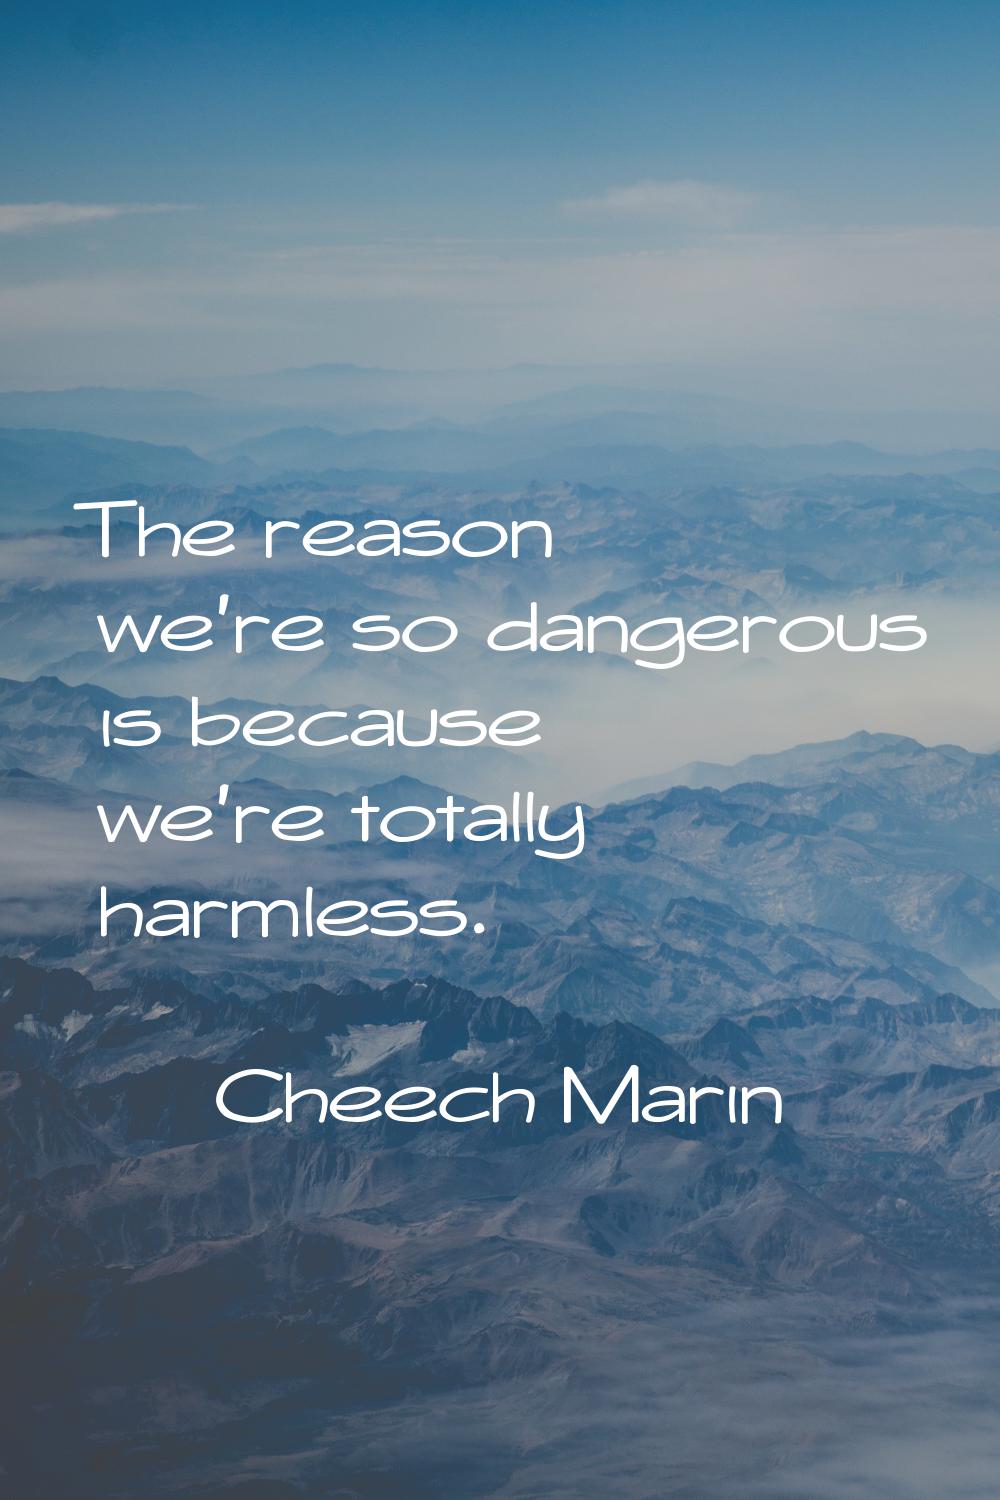 The reason we're so dangerous is because we're totally harmless.